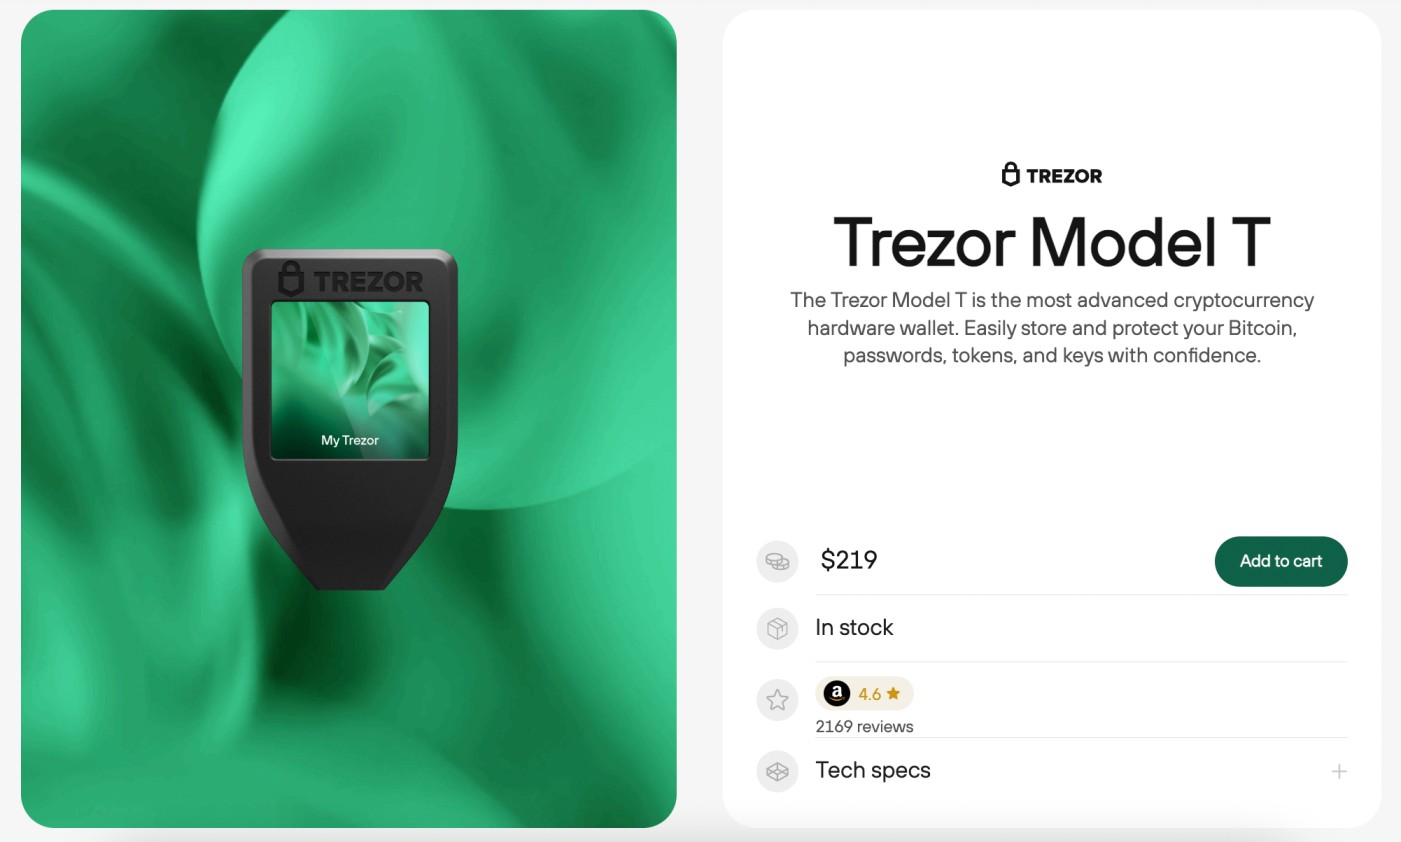 Trezor's New Products Aim to Streamline Crypto for Beginners